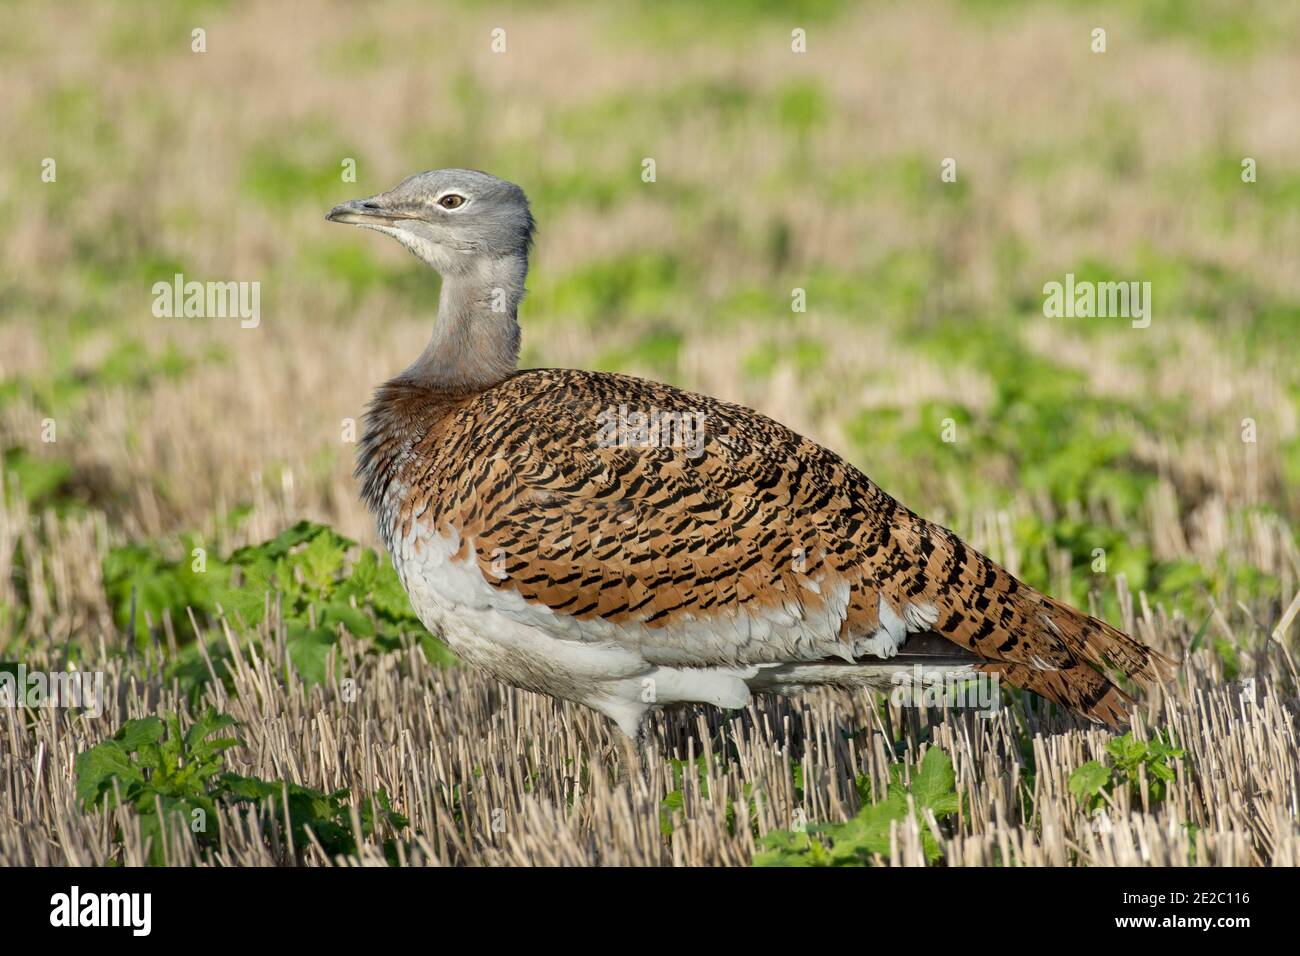 First winter male Great Bustard, Otis tarda, from the reintroduction program taking place on Salisbury Plain,  in a stubble field at Letcombe Regis Stock Photo